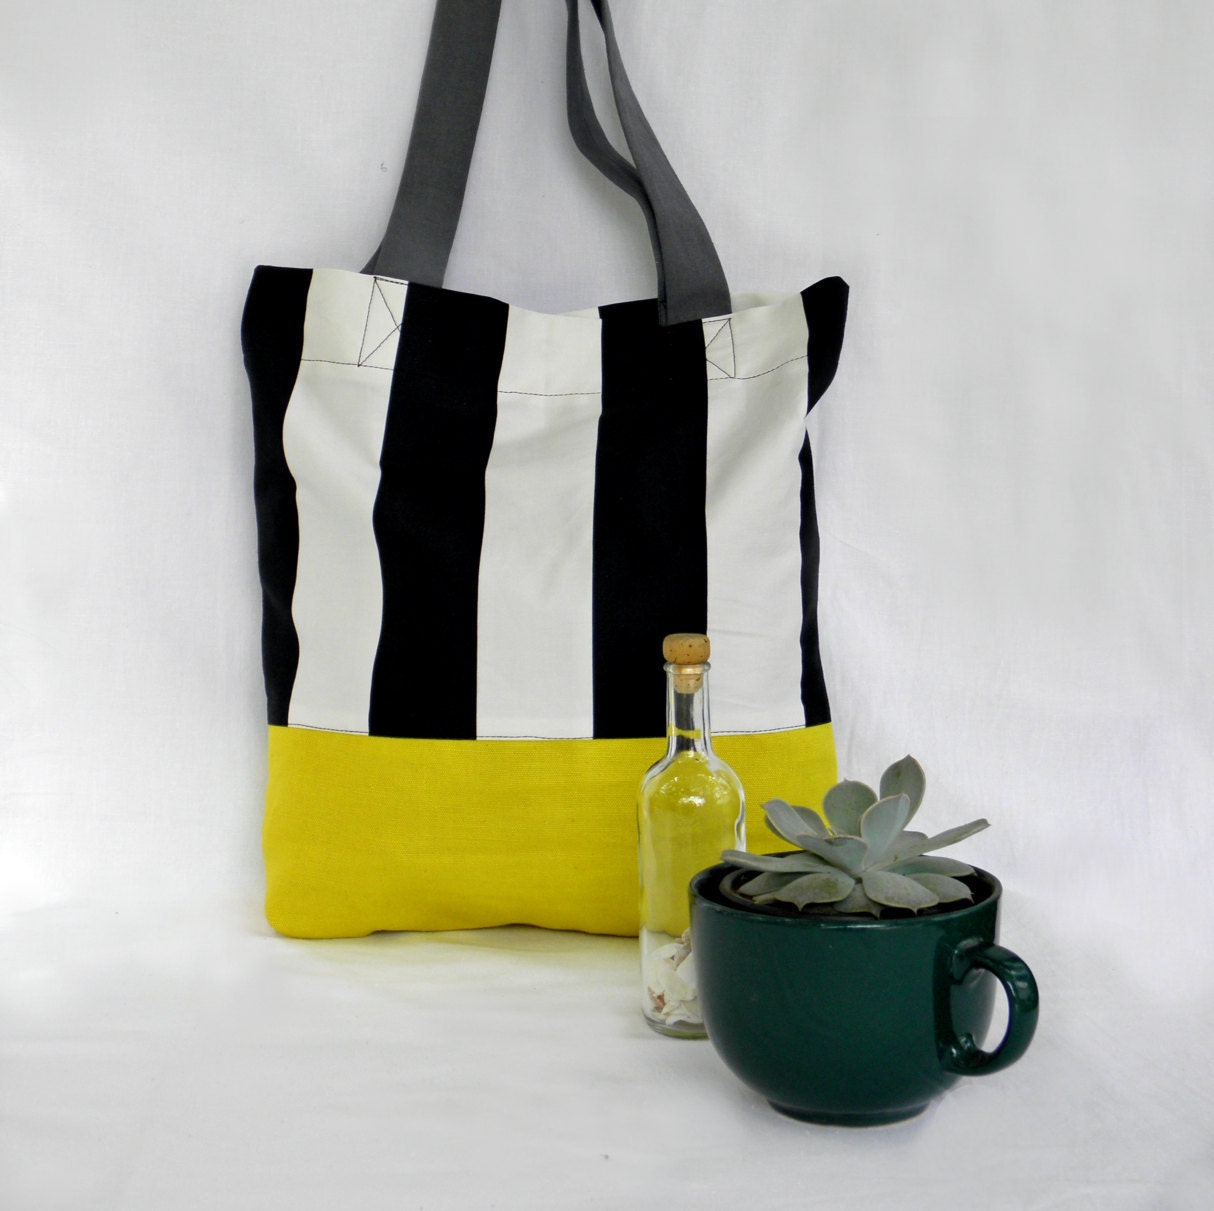 Striped tote bag Black and white yellow canvas Stripe | Etsy